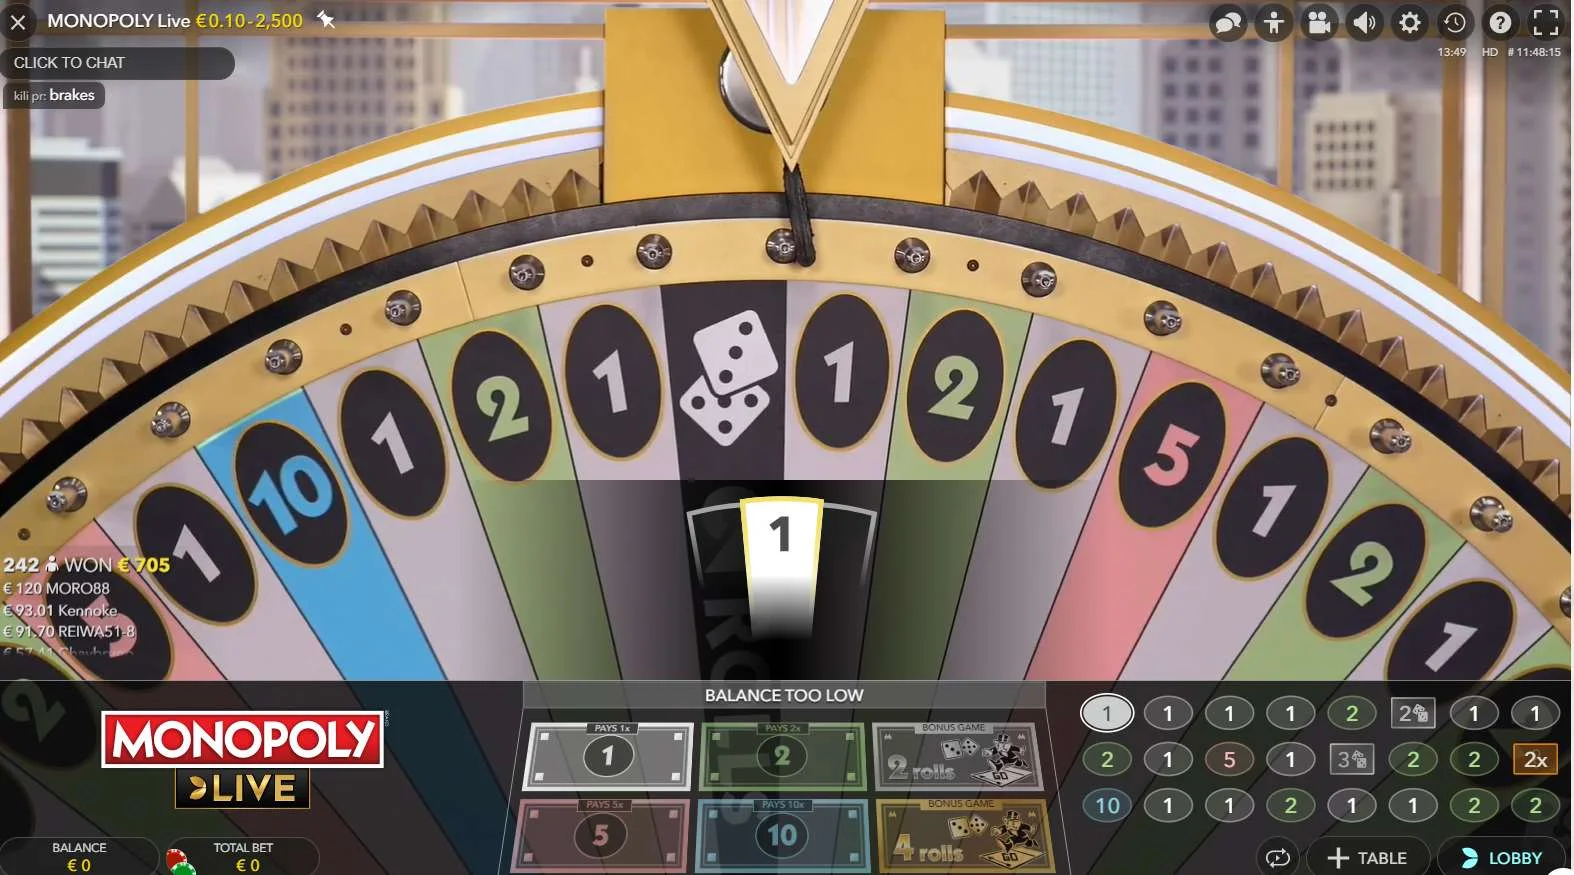 Monopoly Live streaming